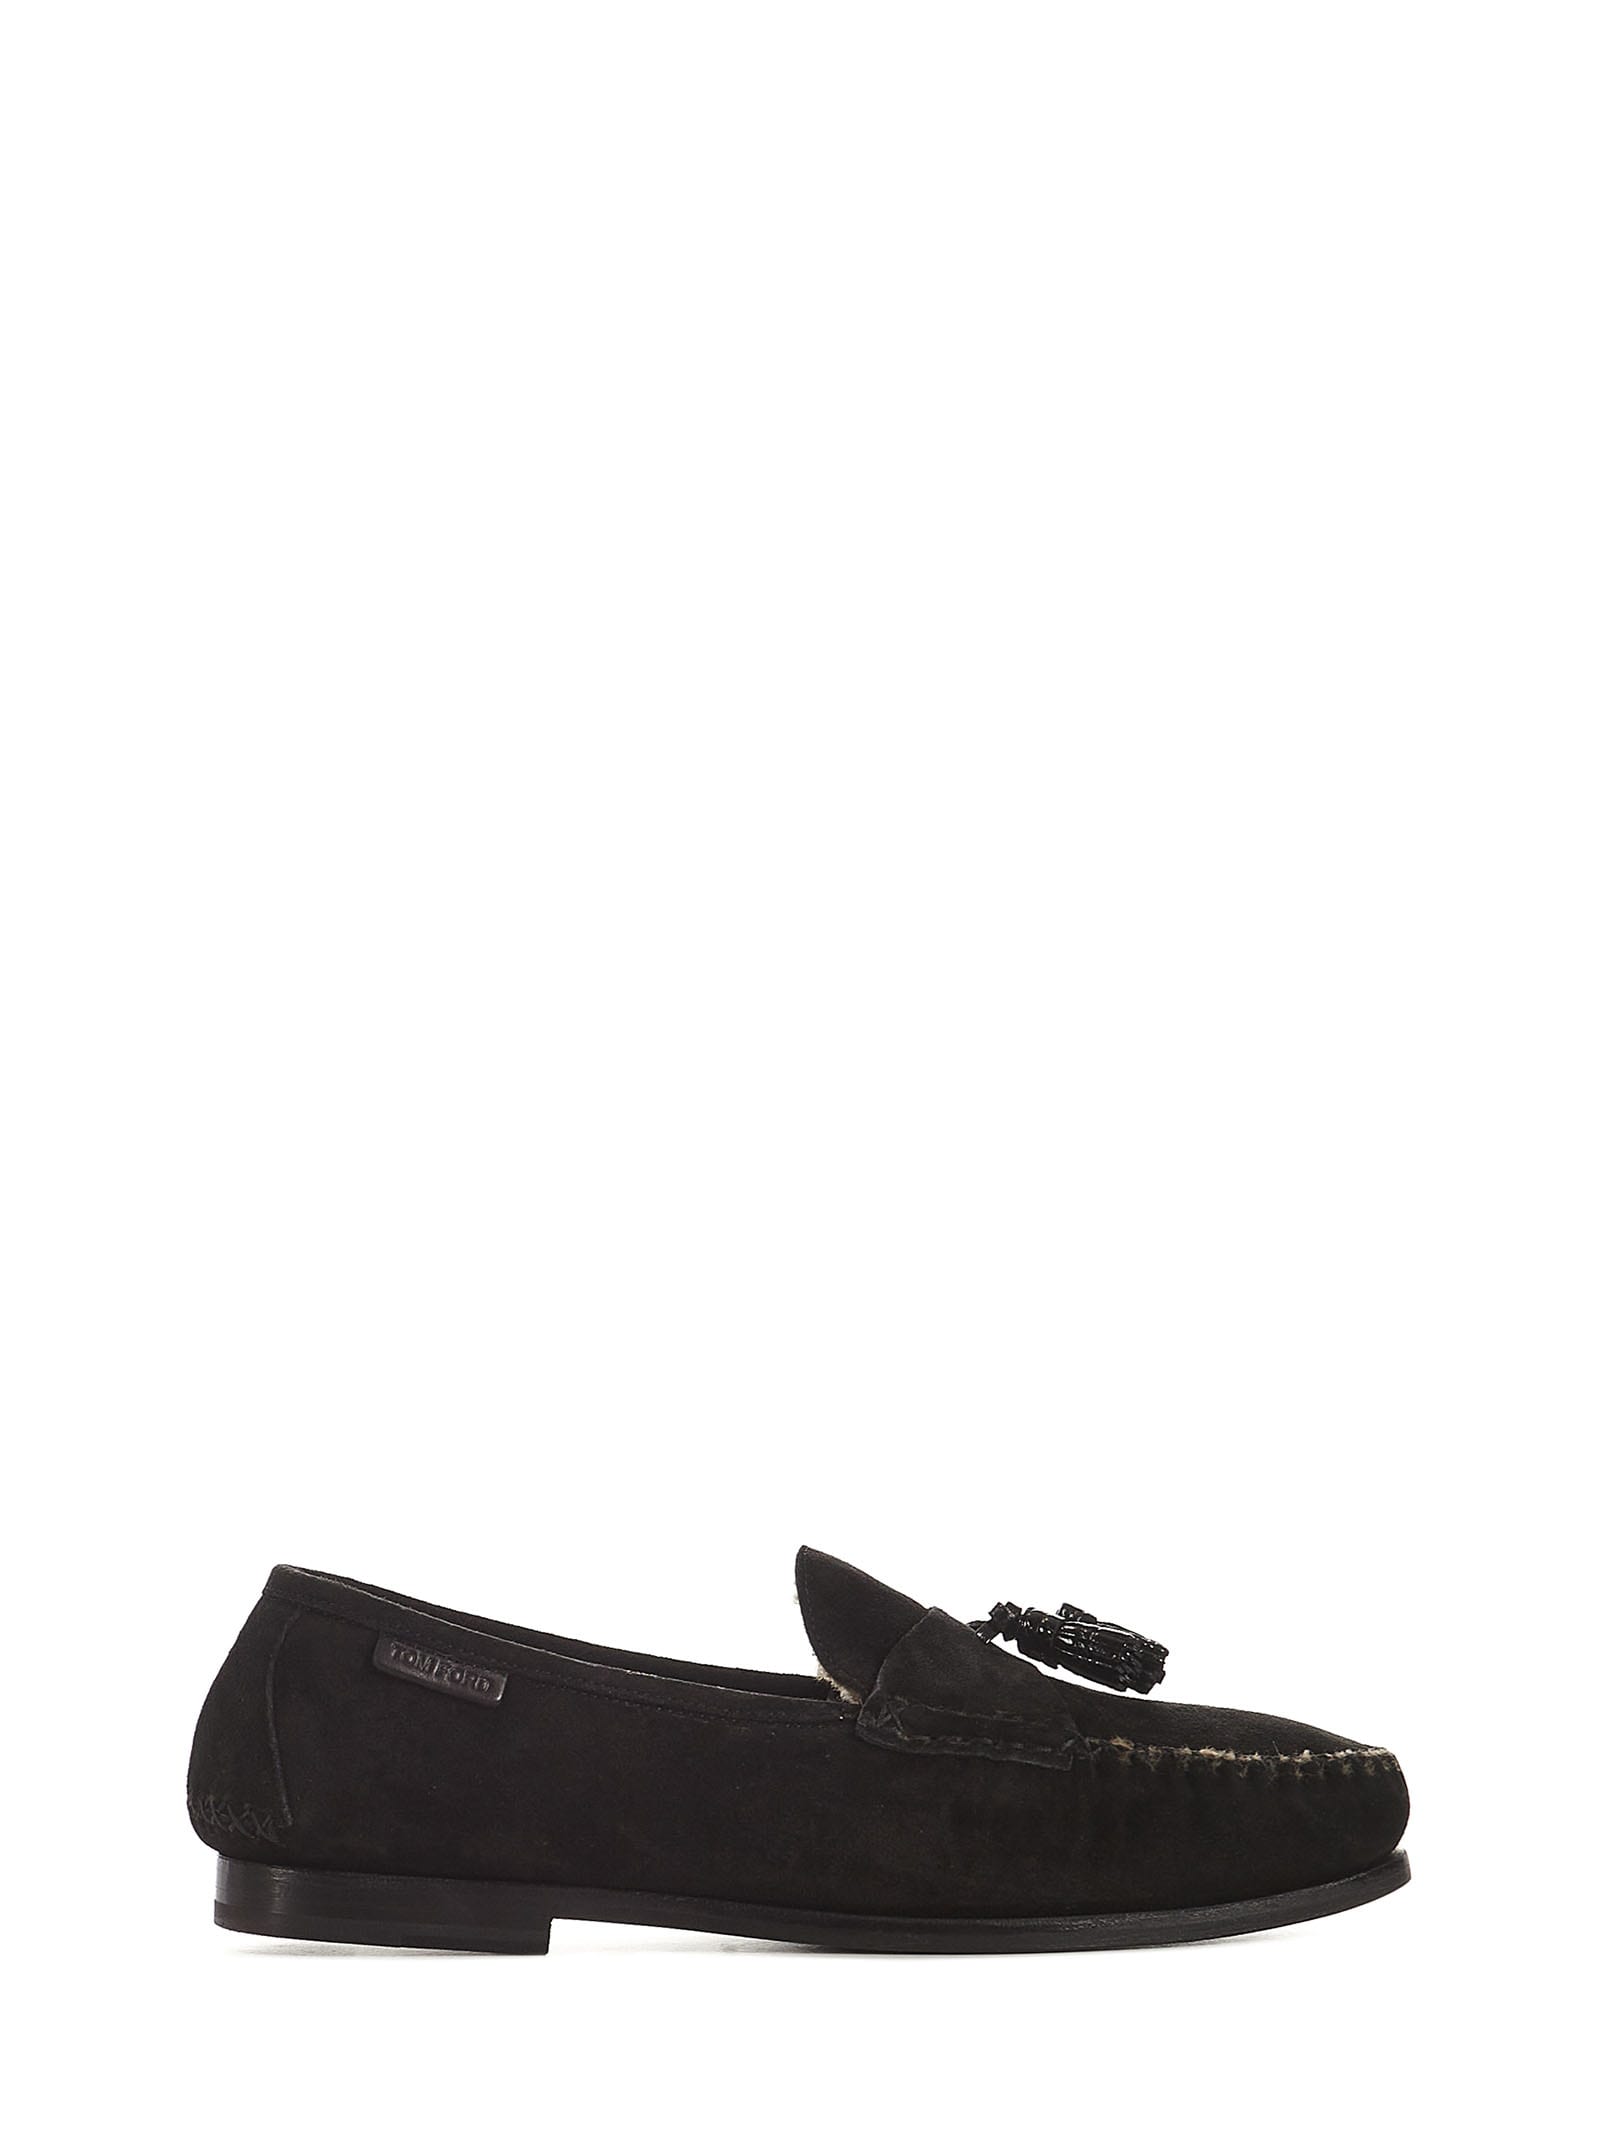 Tom Ford Berwick Shearling Loafers